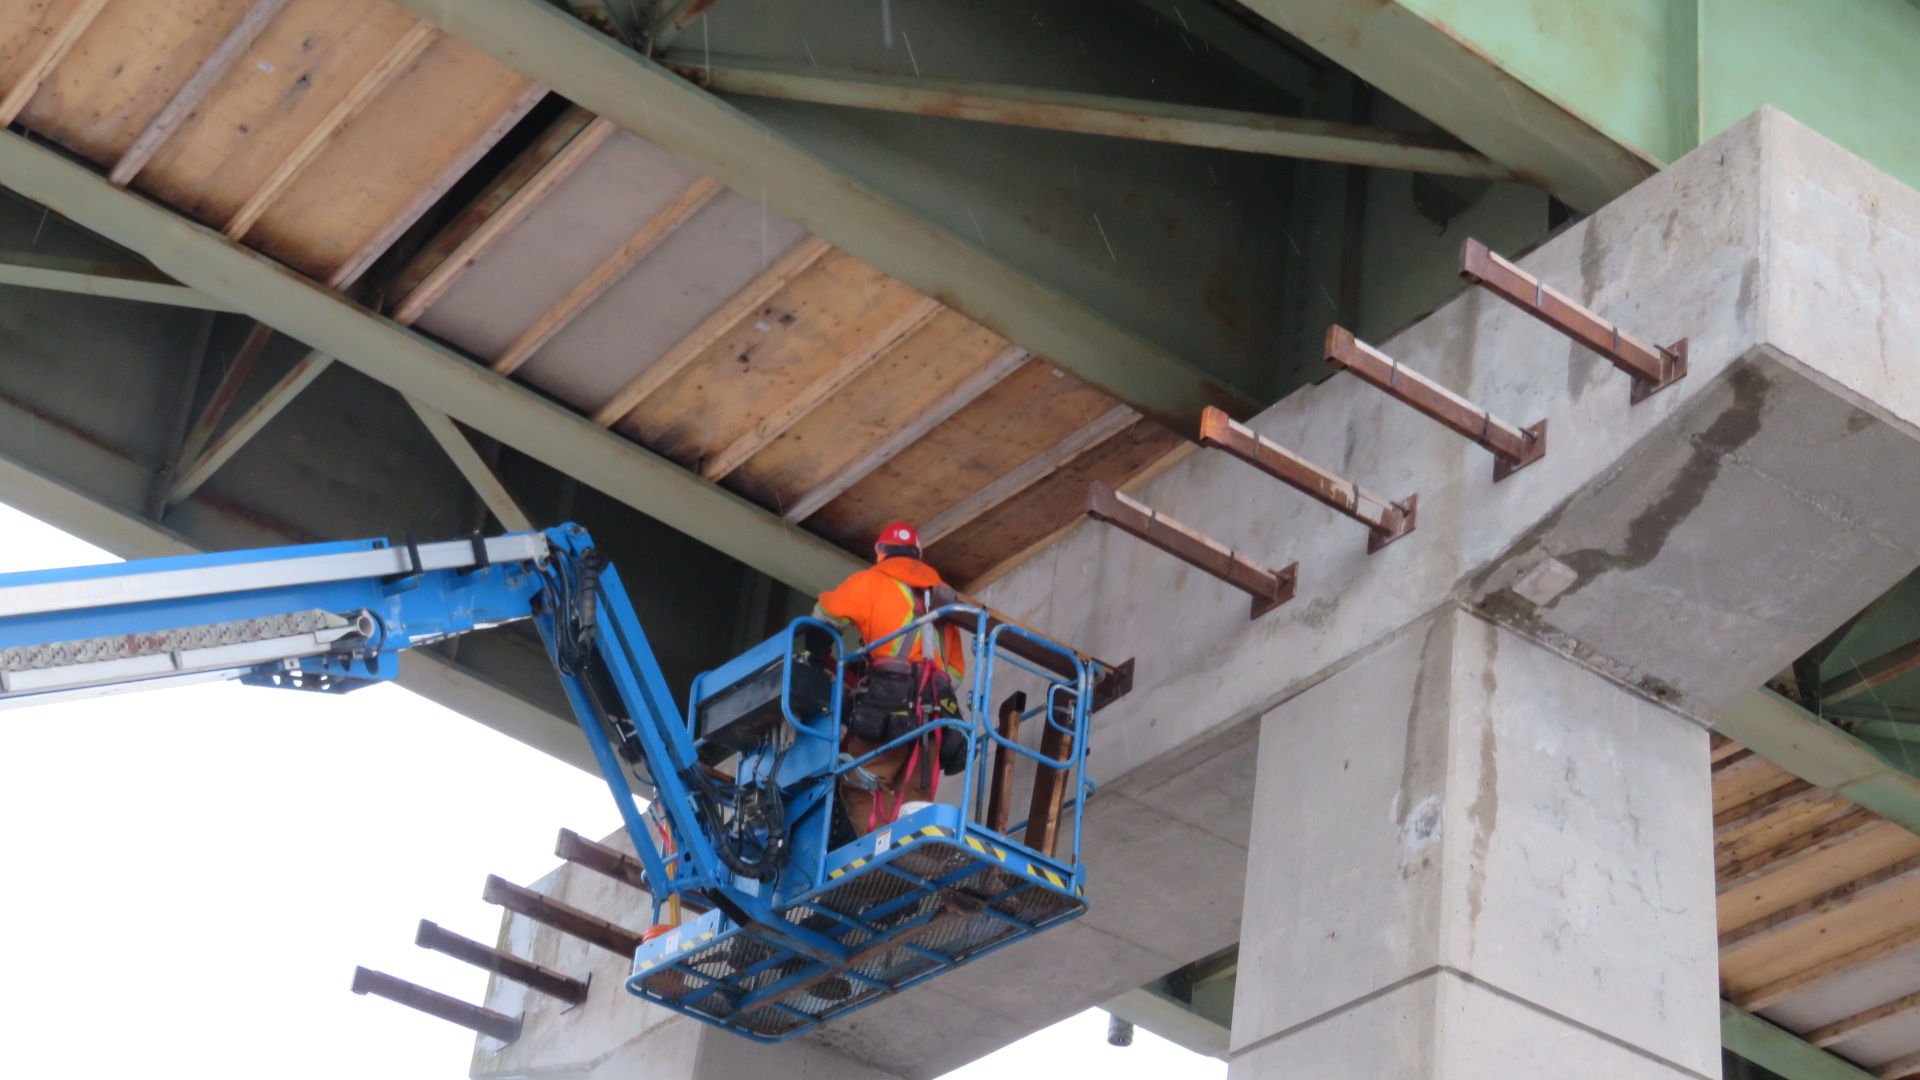 Installing access platform brackets on the north side of pier 16